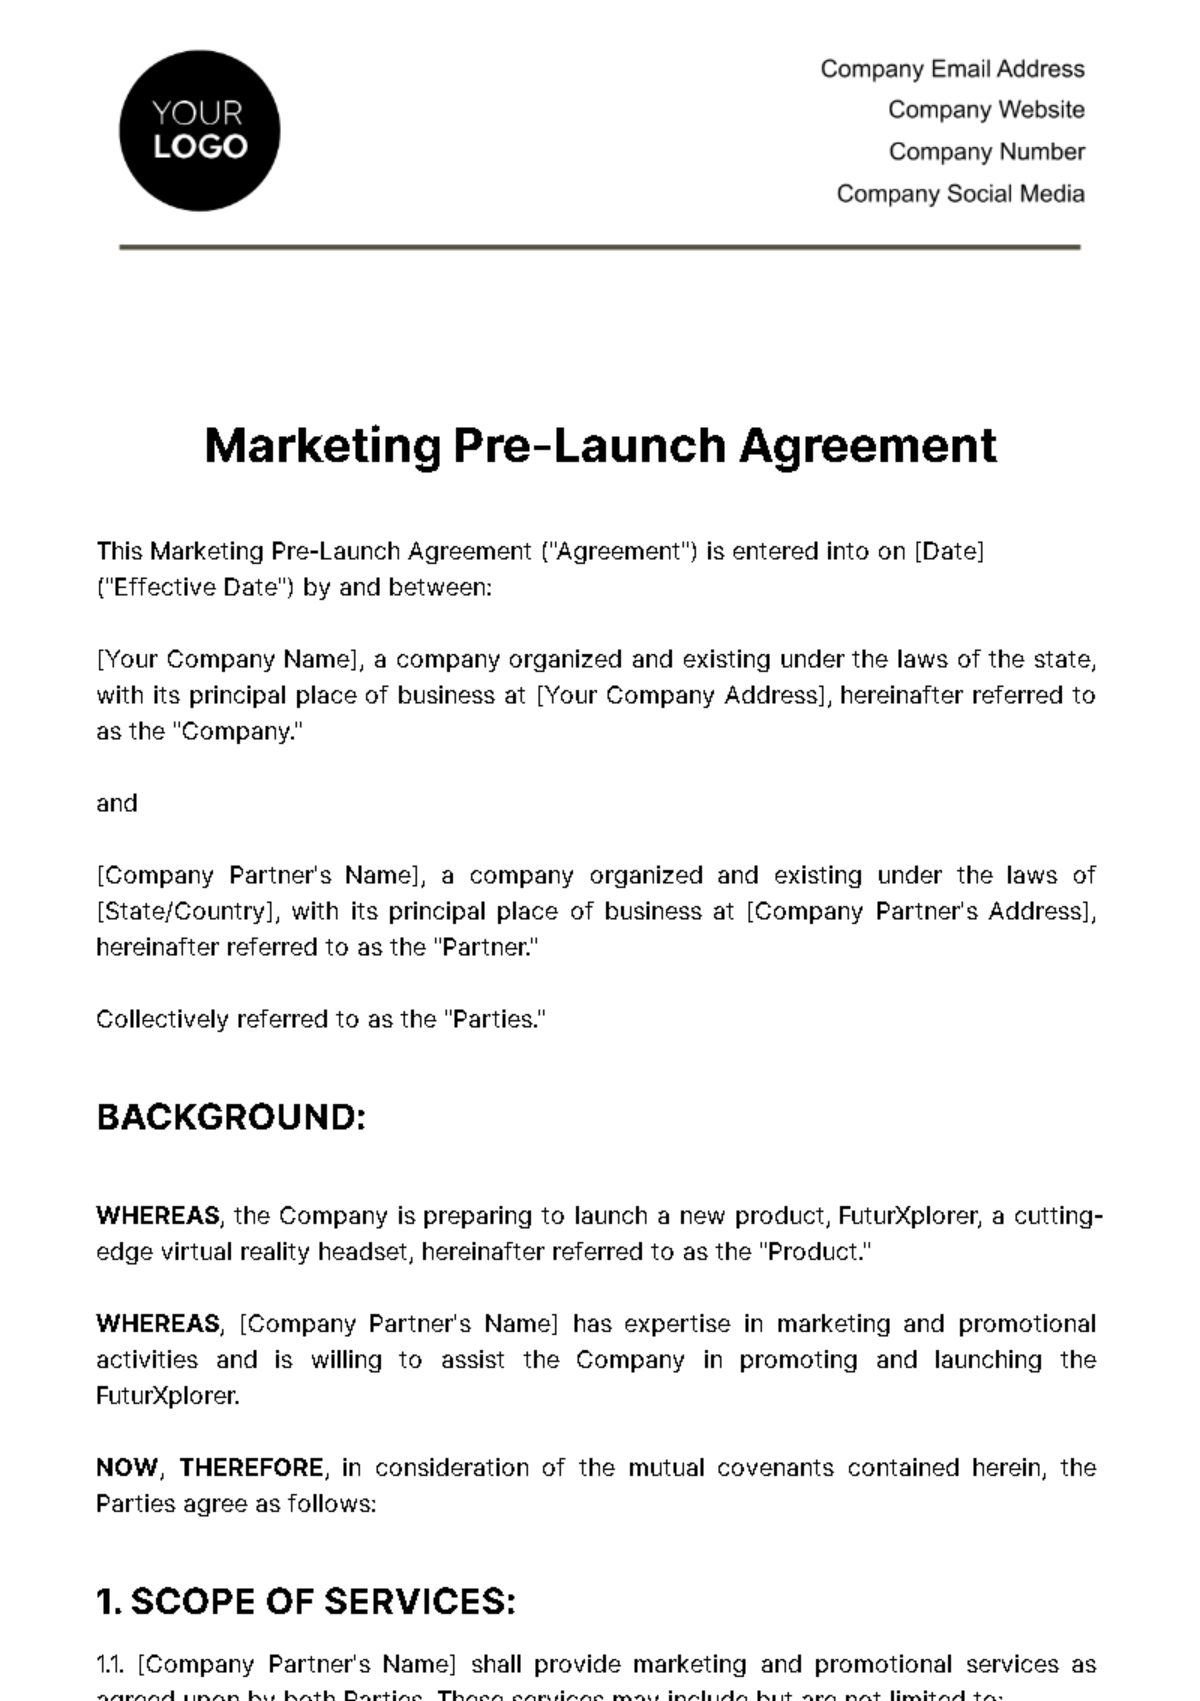 Free Marketing Pre-Launch Agreement Template